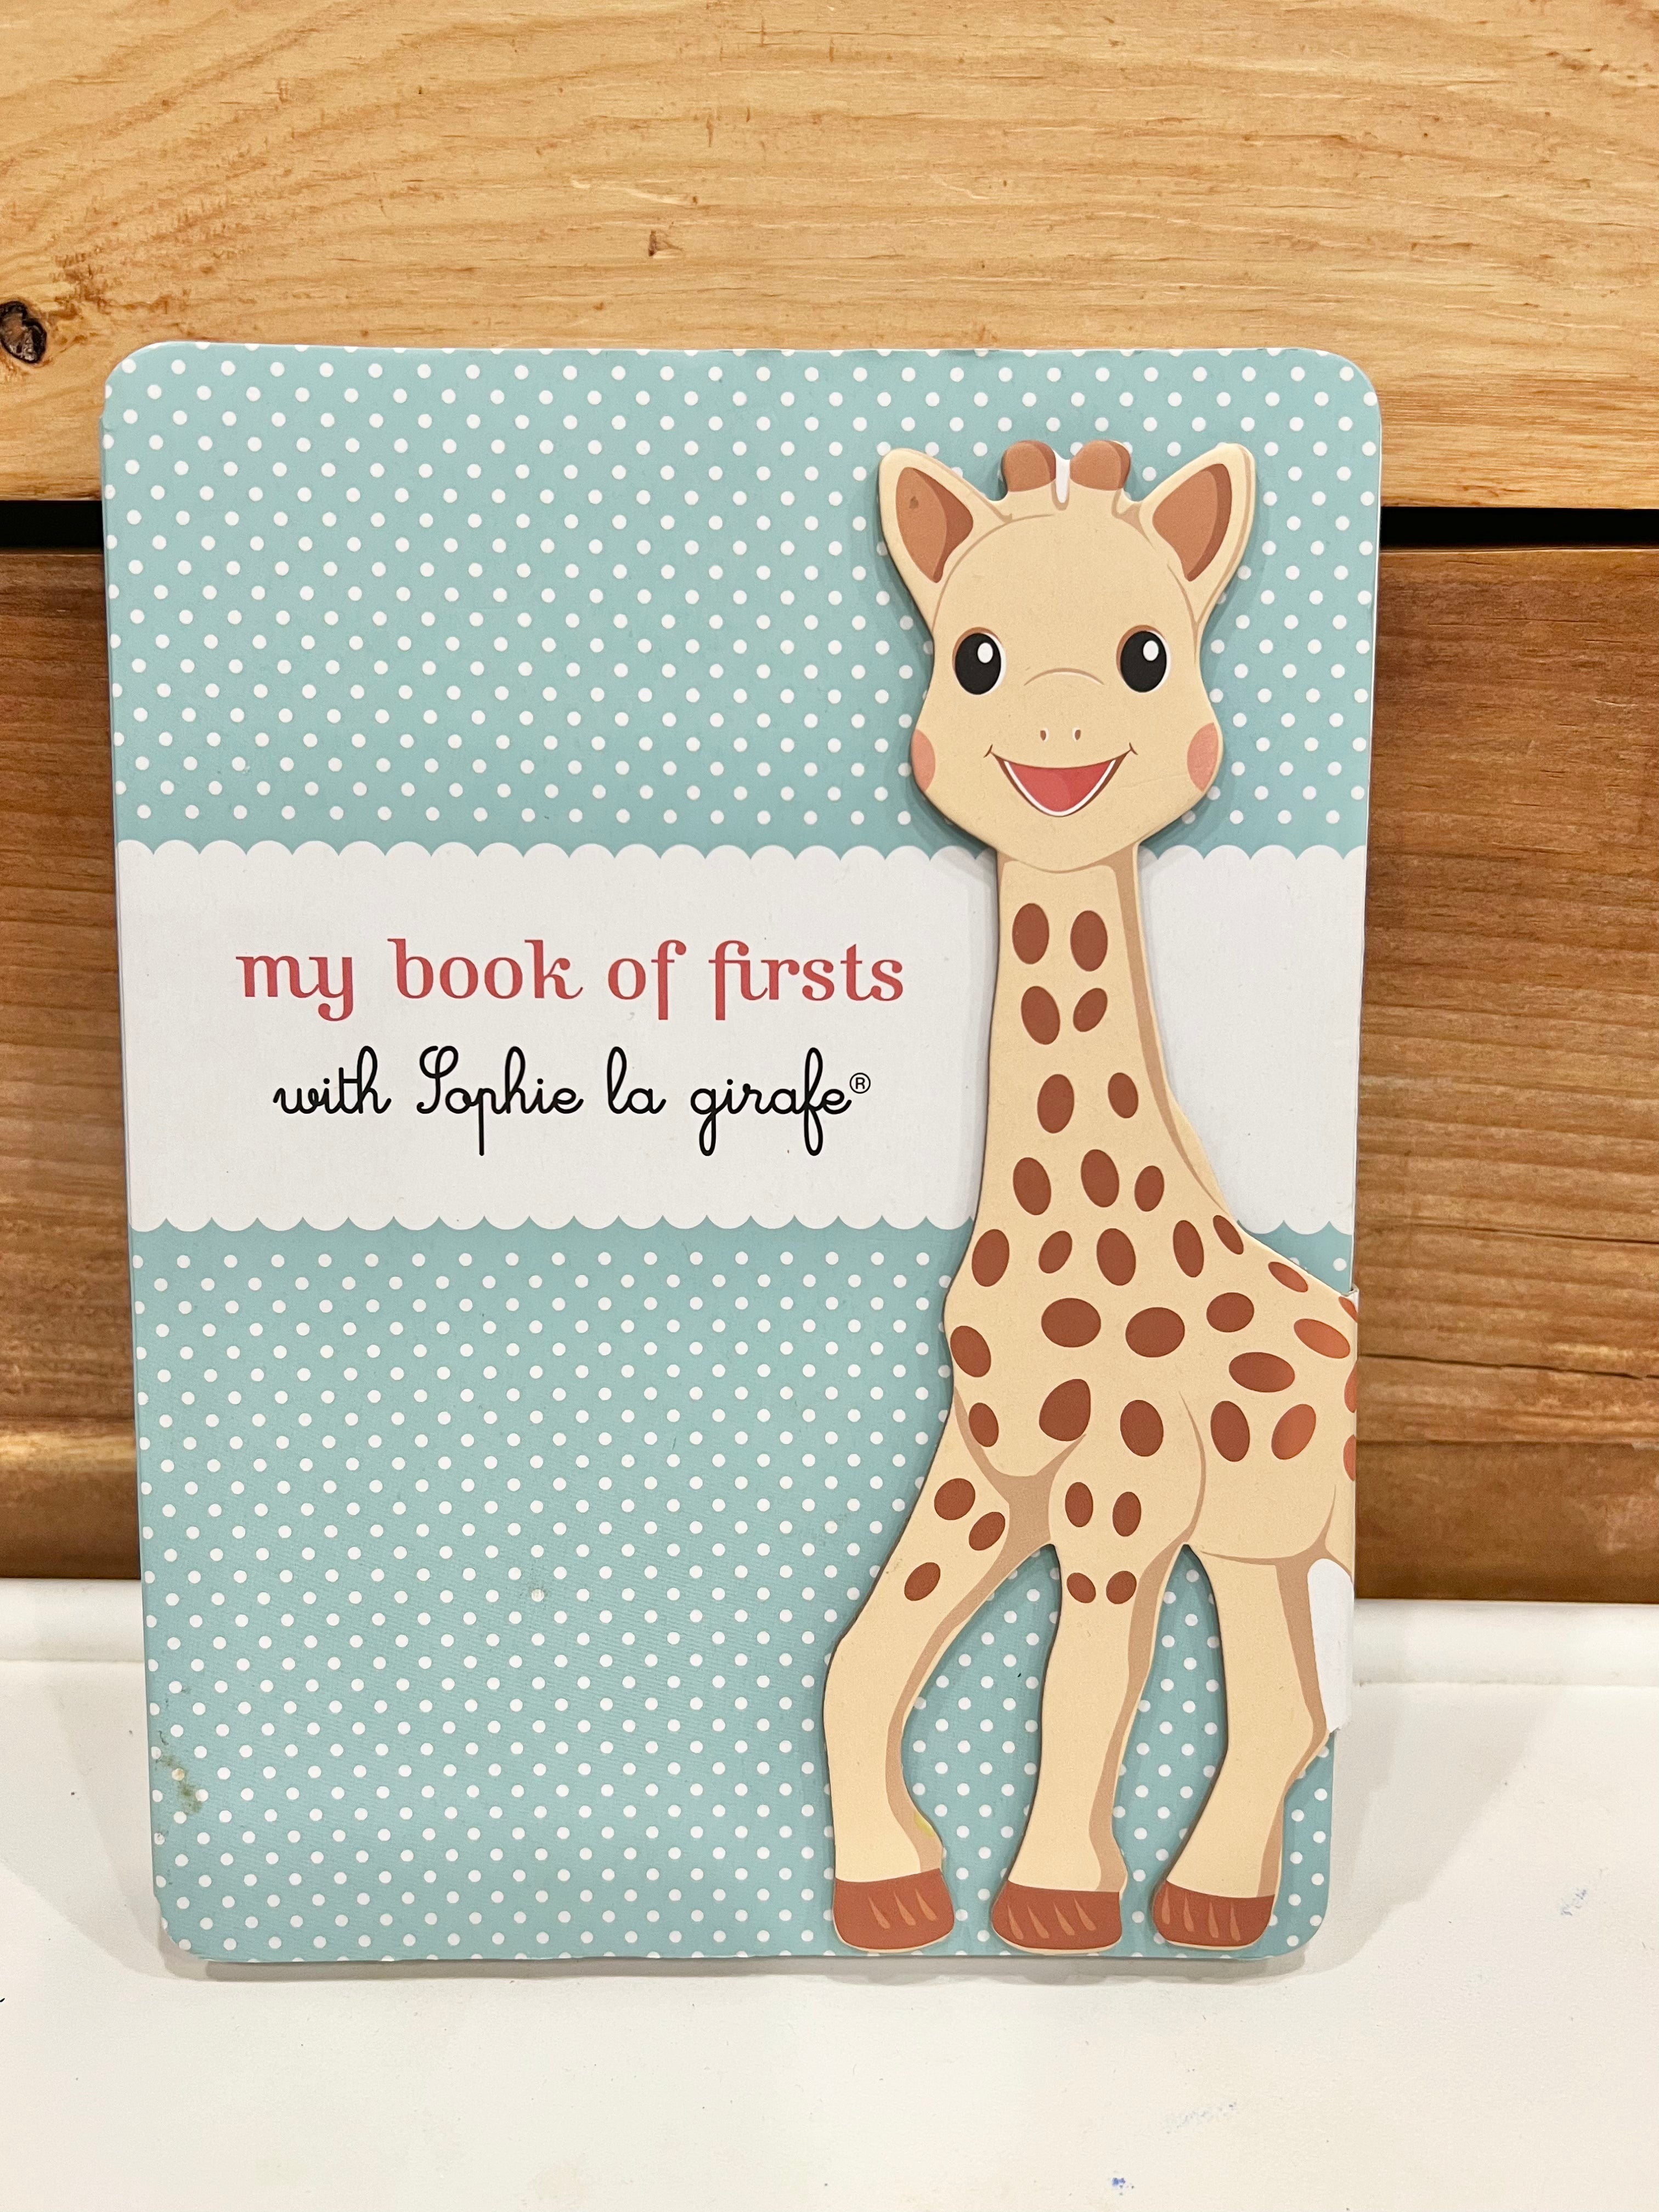 A History of Sophie the Giraffe